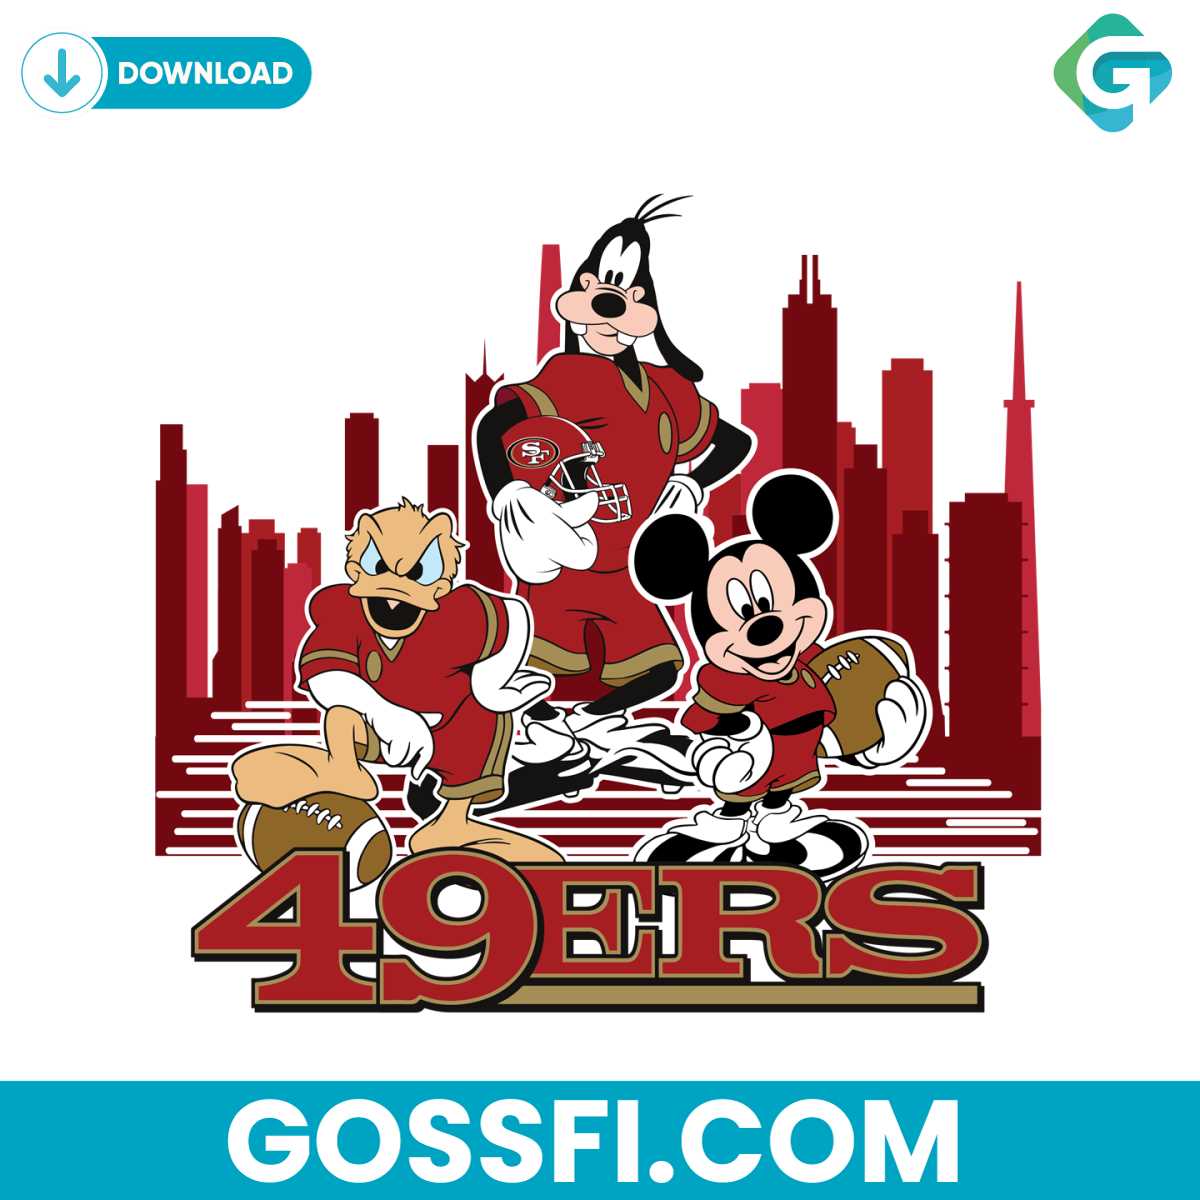 mickey-mouse-and-friends-play-football-49ers-city-svg